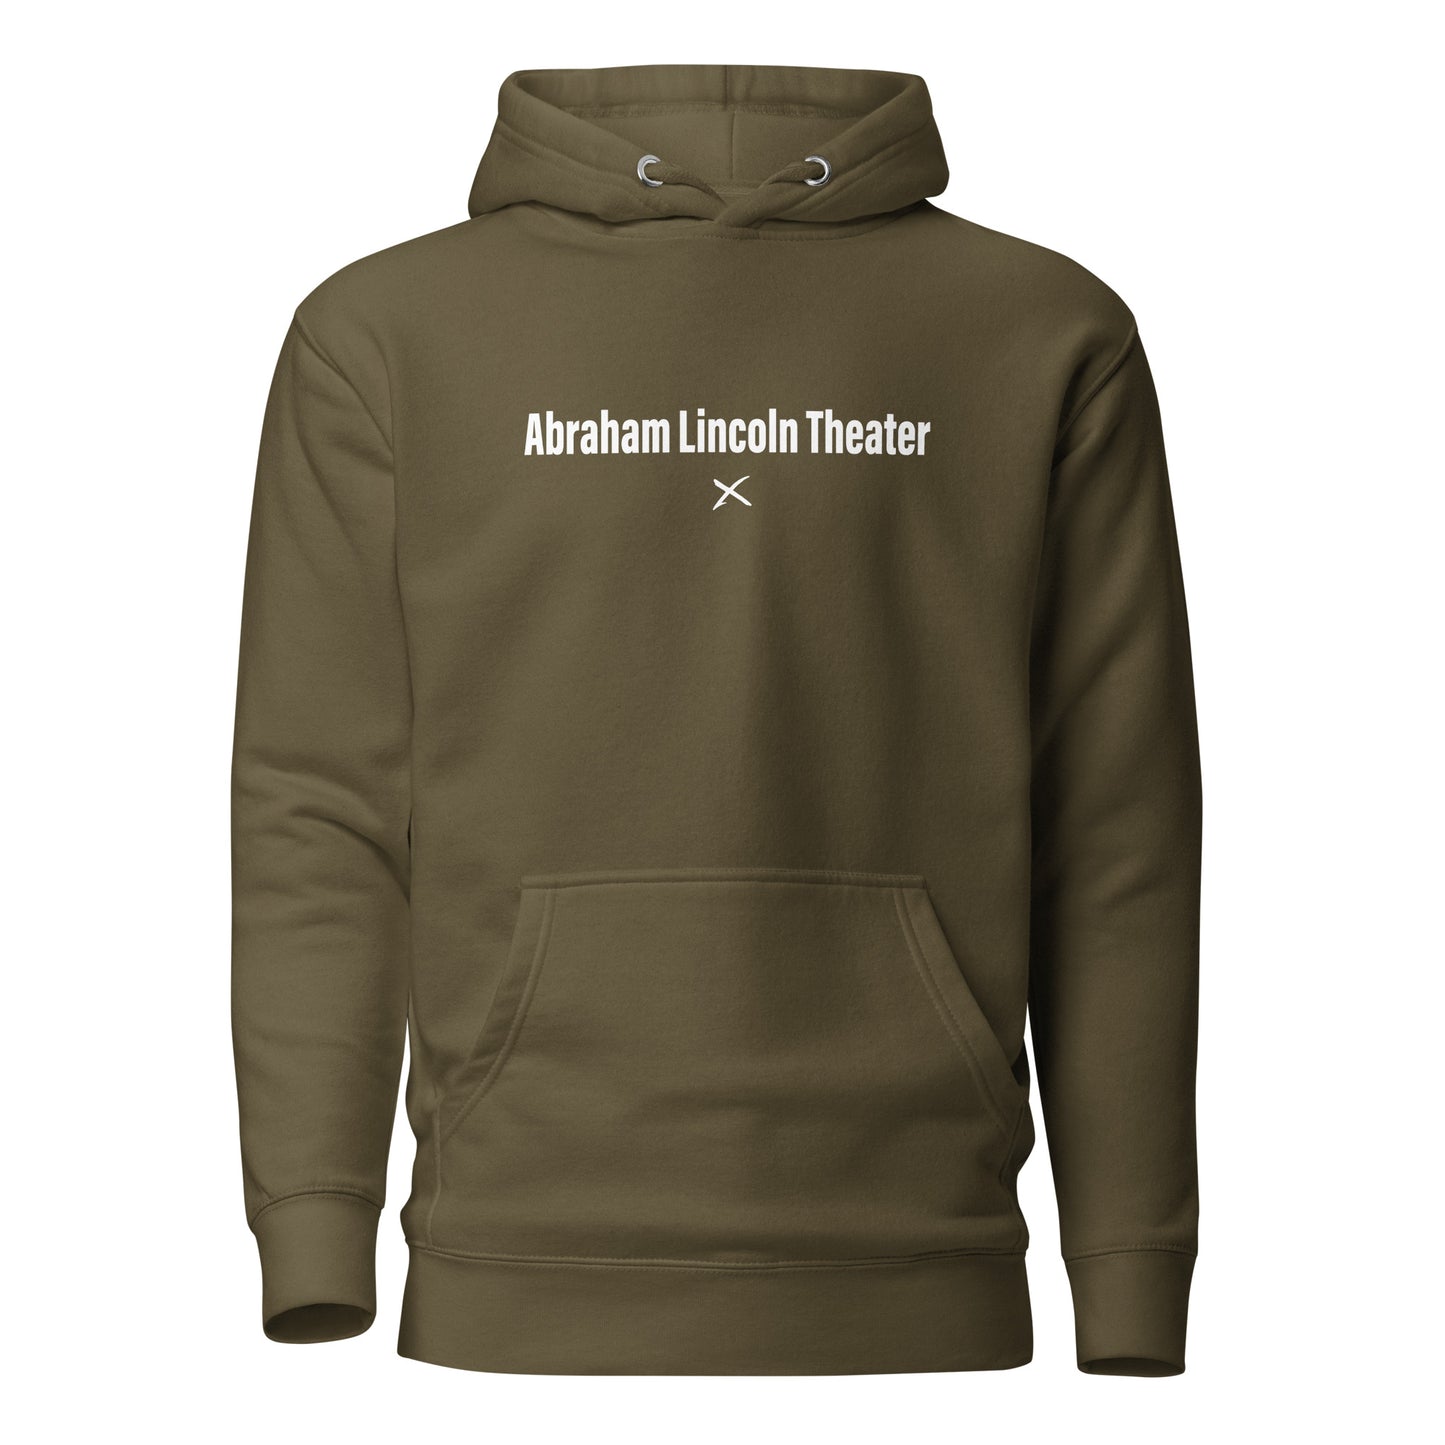 Abraham Lincoln Theater - Hoodie